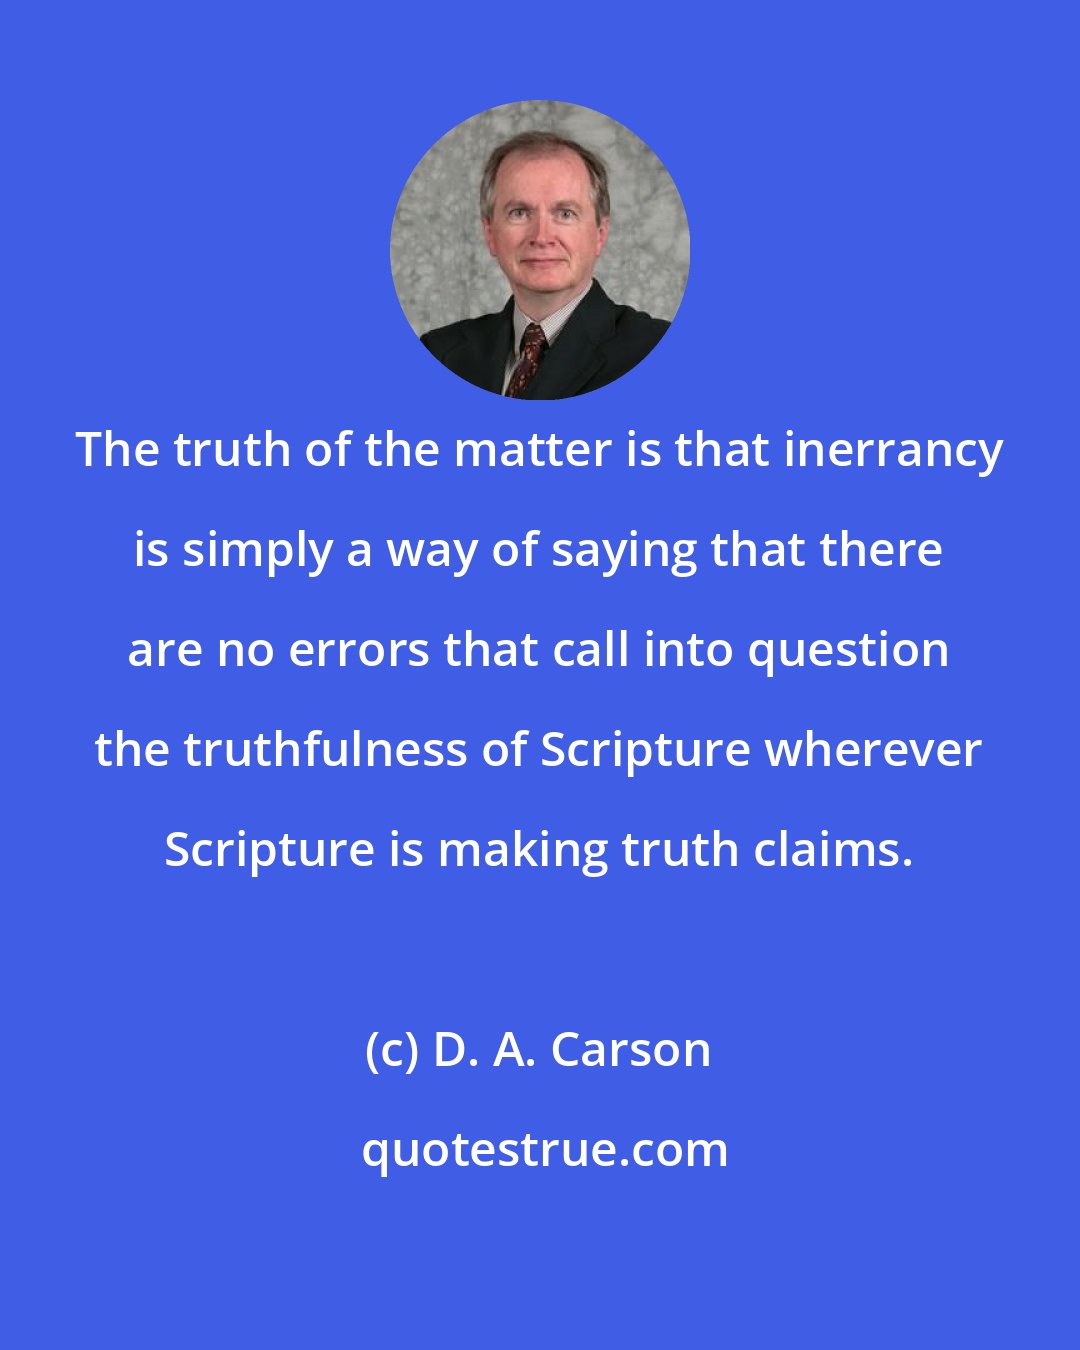 D. A. Carson: The truth of the matter is that inerrancy is simply a way of saying that there are no errors that call into question the truthfulness of Scripture wherever Scripture is making truth claims.